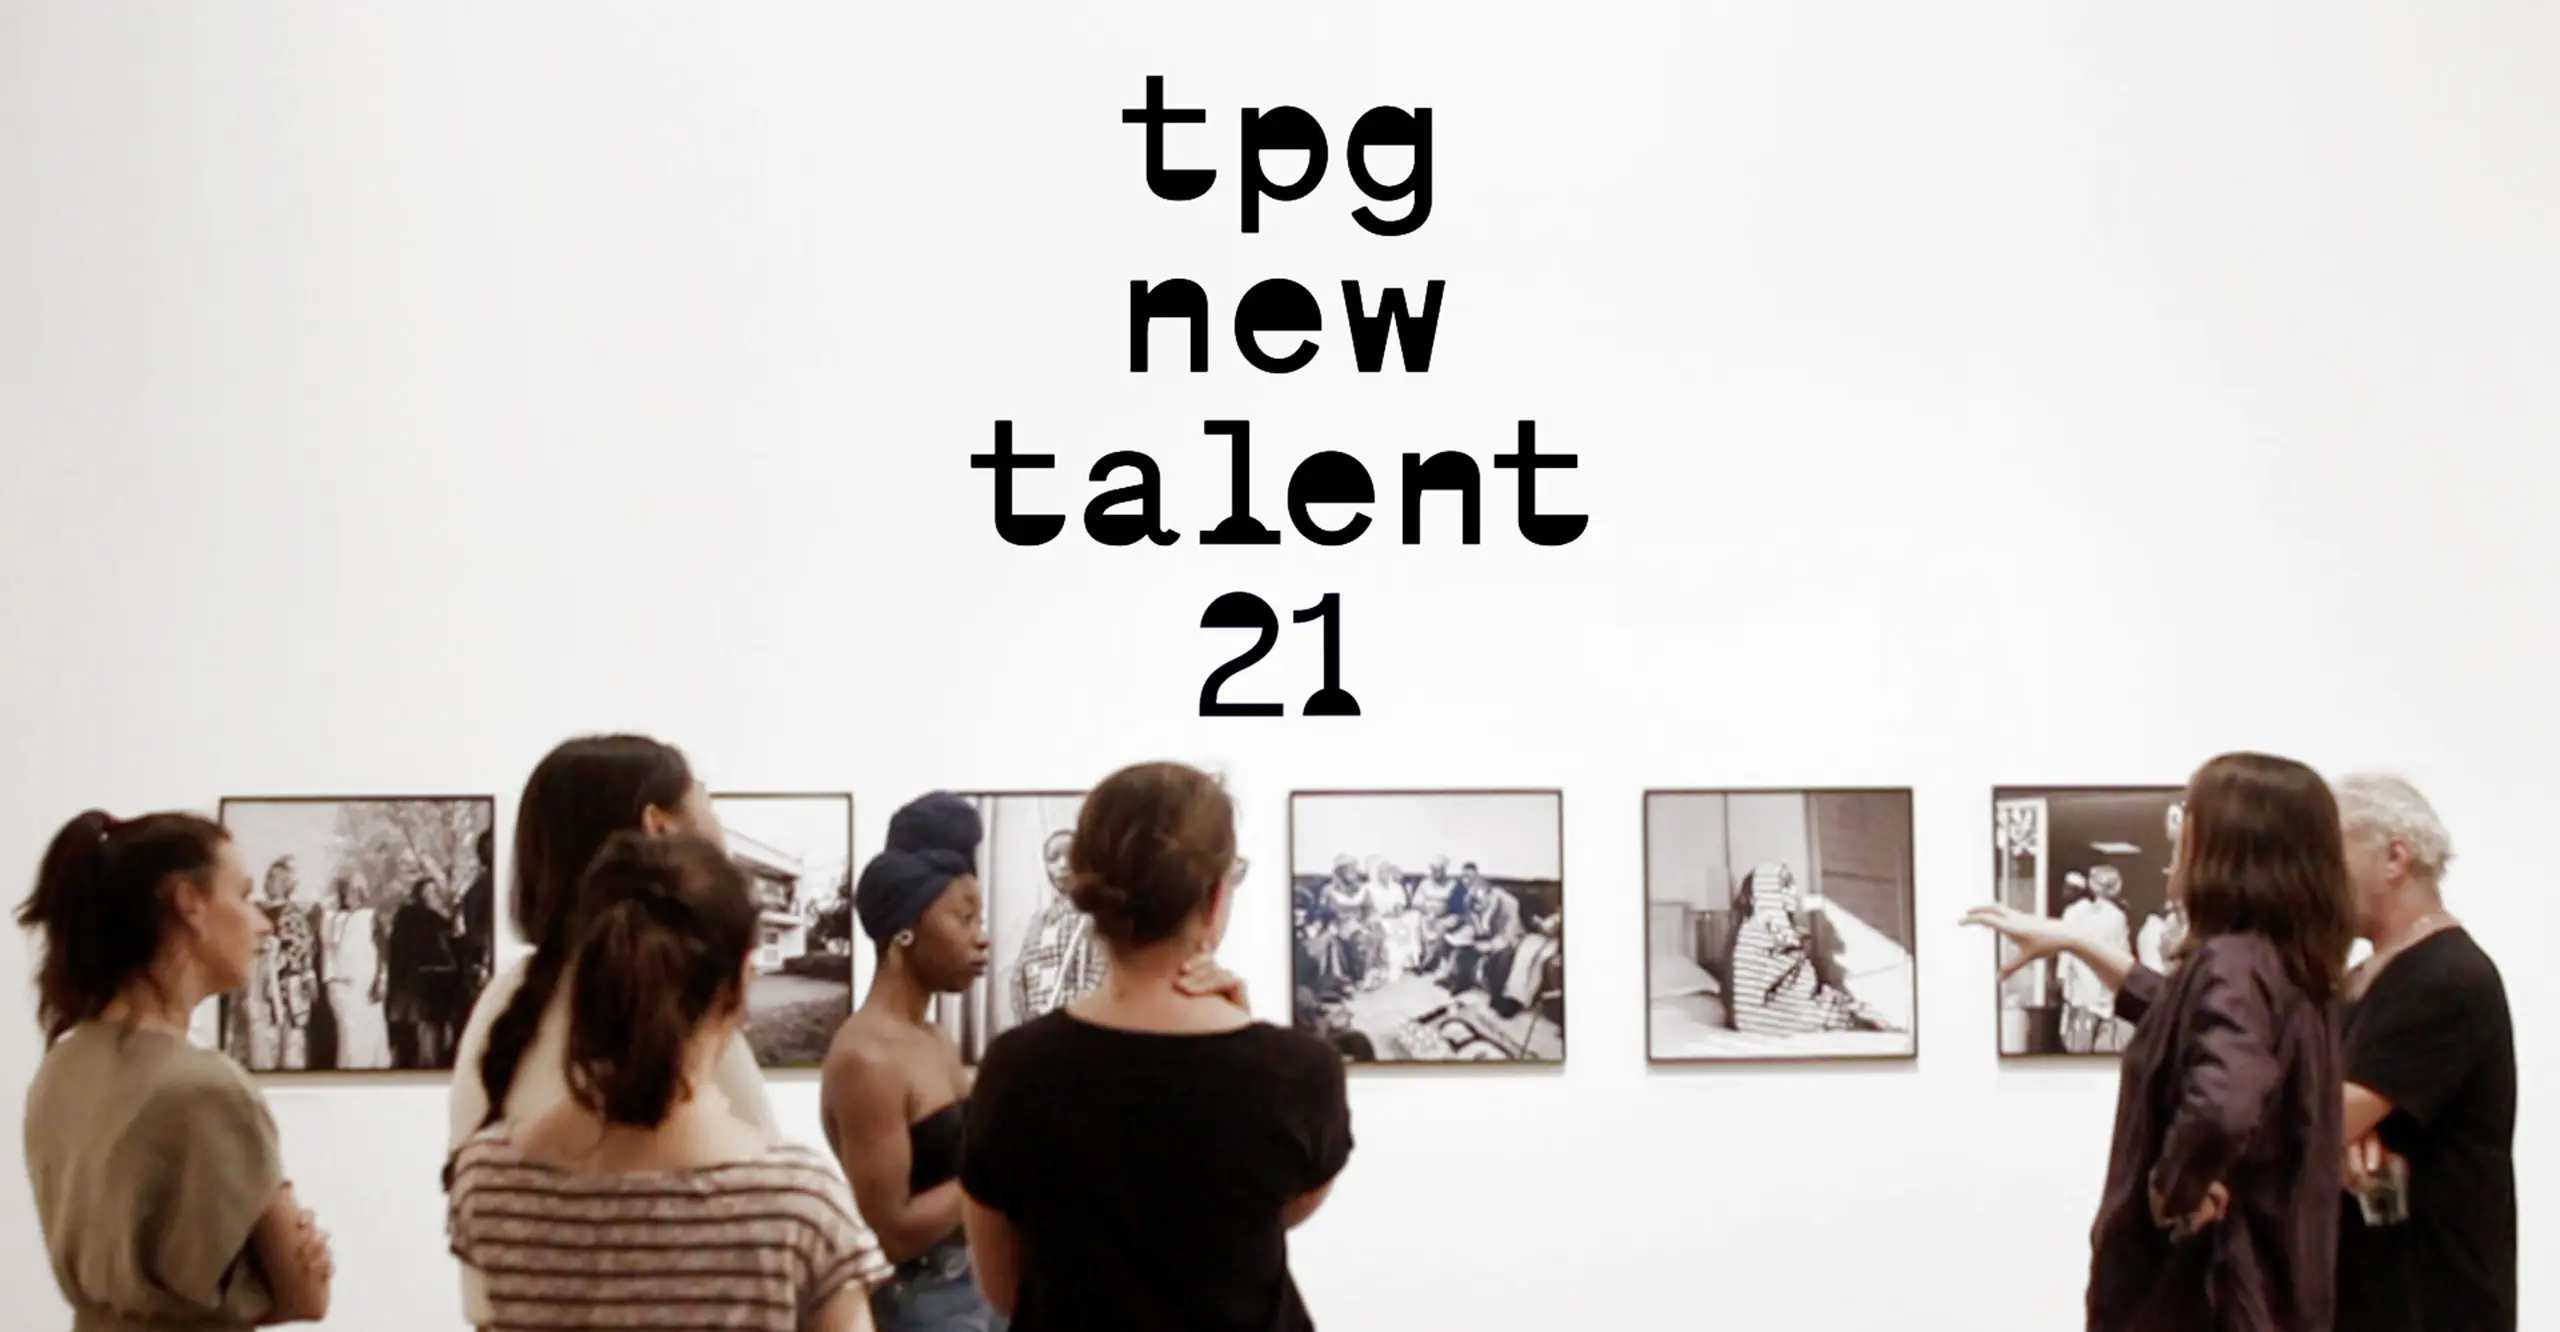 Young photographers are in conversation with Jim Goldberg. The words TPG New Talent '21 appear above them.